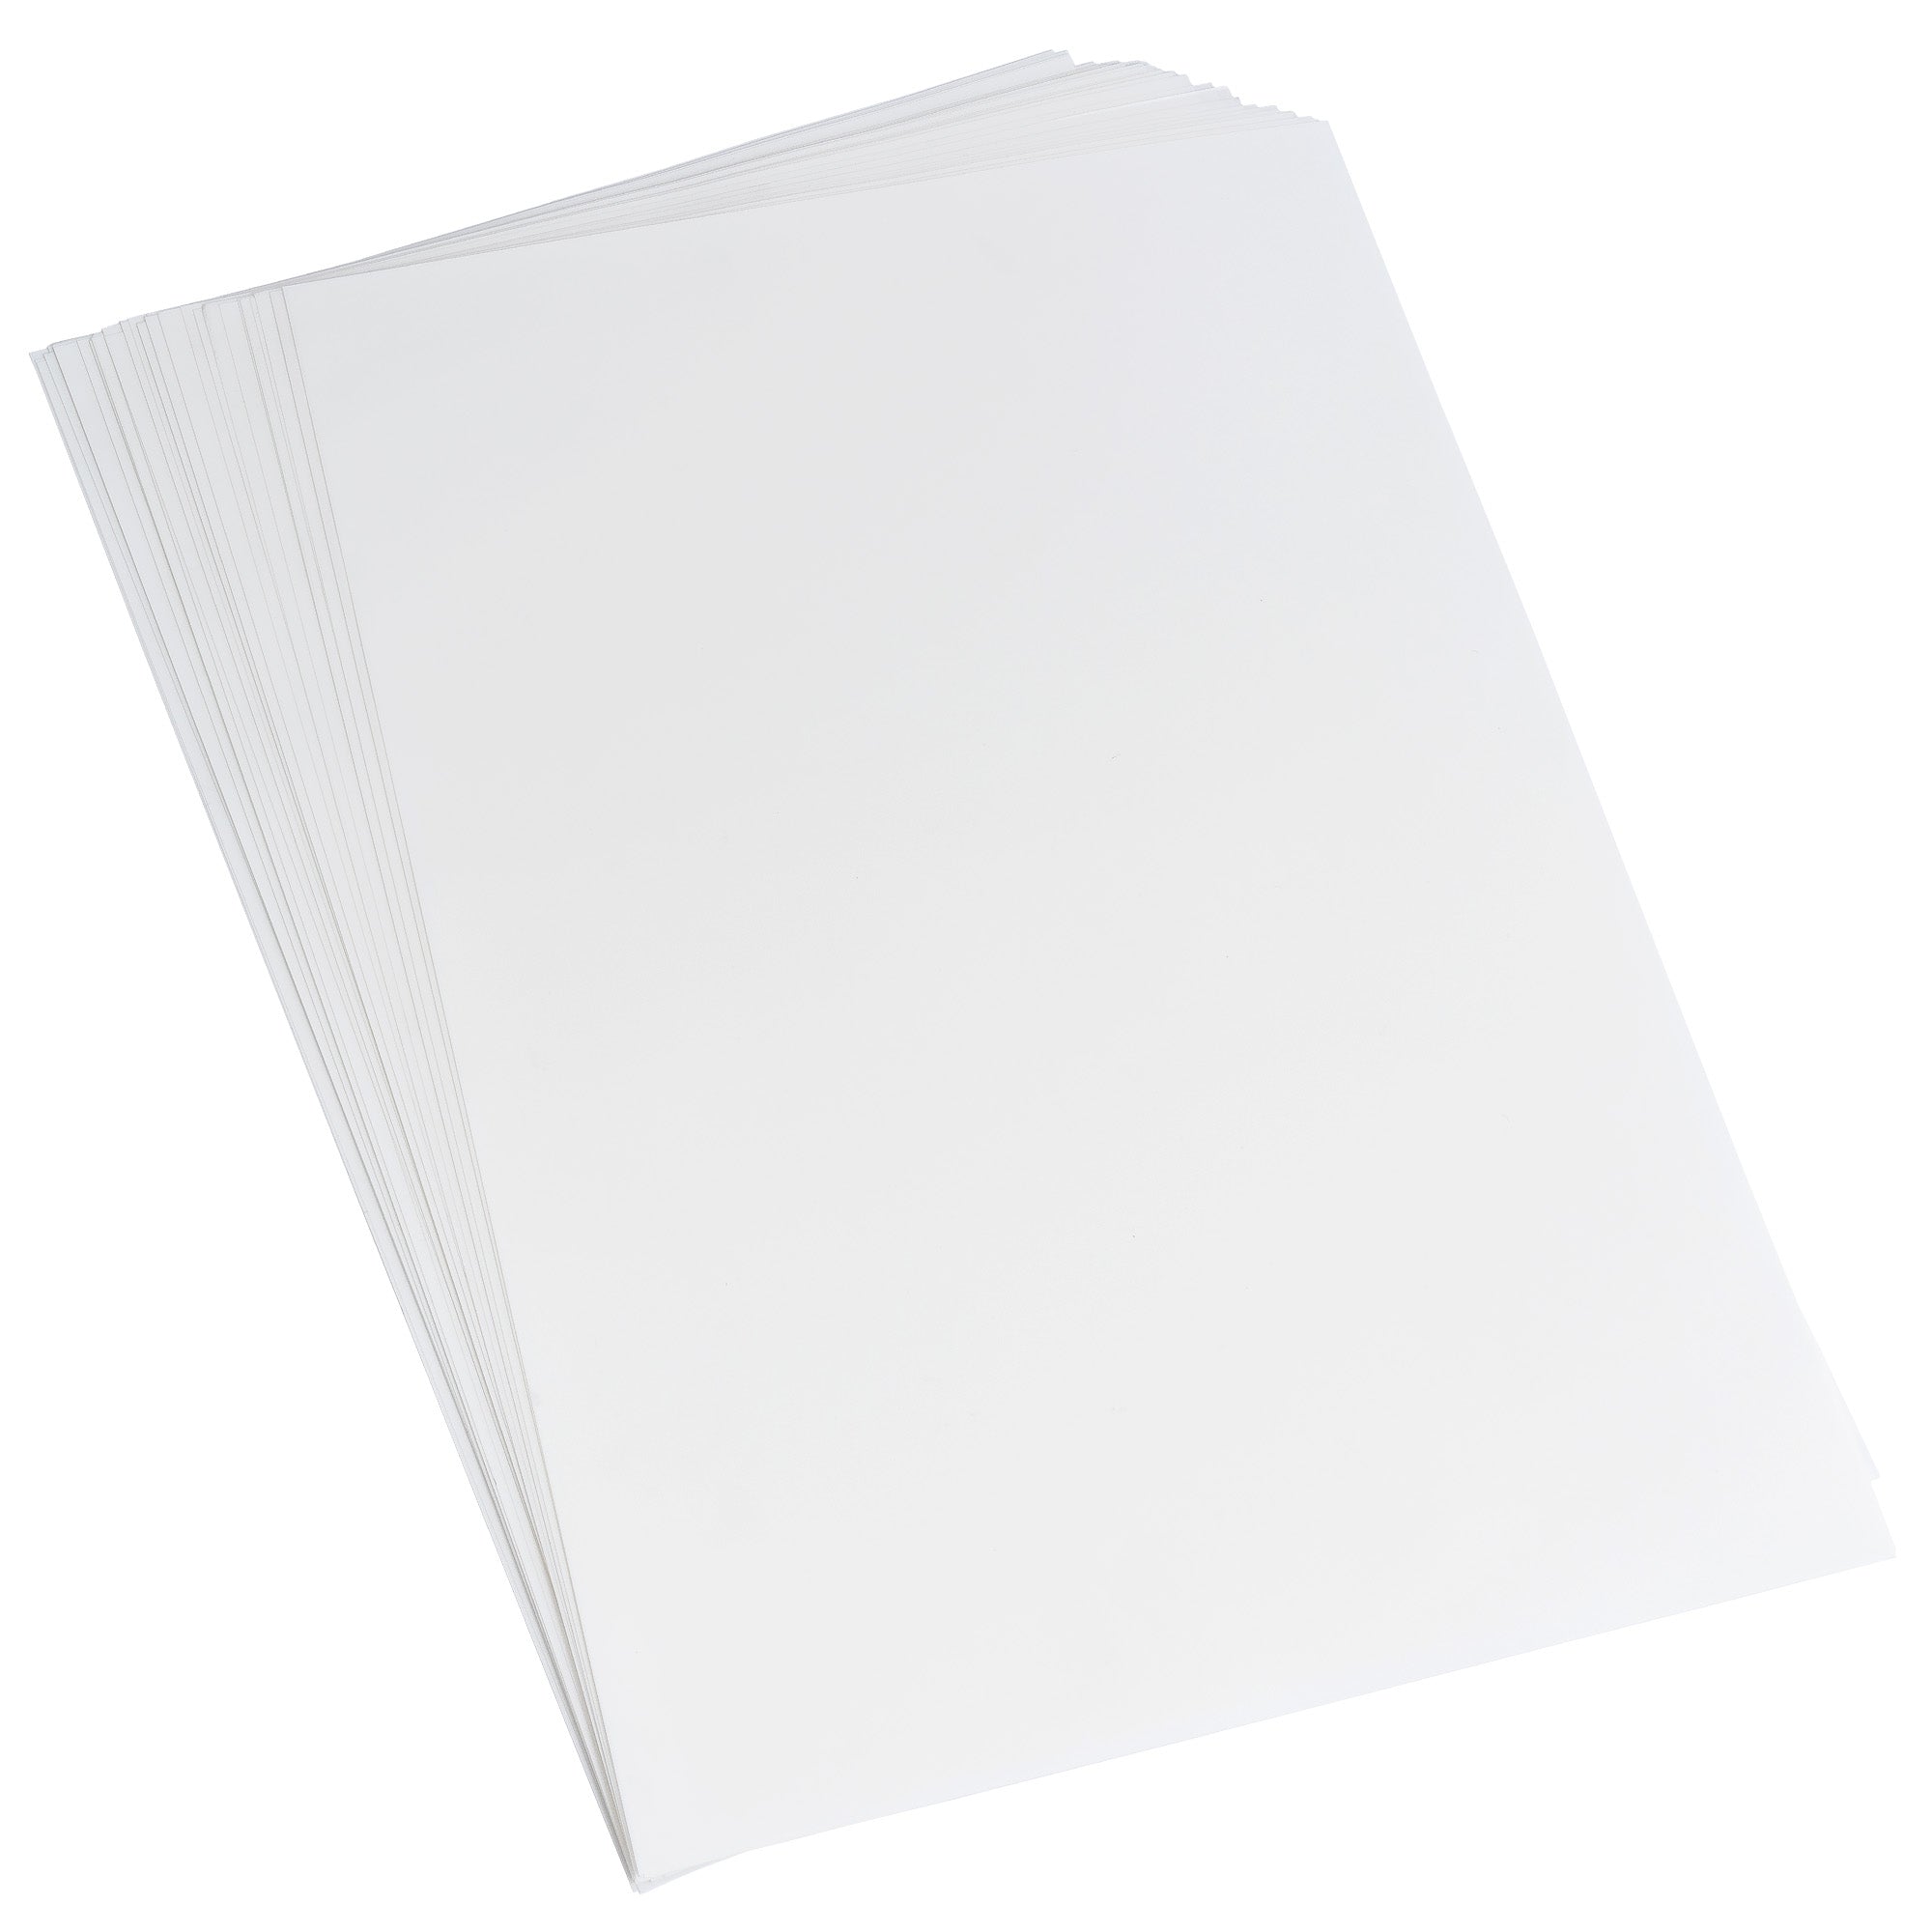 13" x 19" Laser Printer Coated Double-Sided Waterproof Printing Film Translucent PET  - 50 Sheets